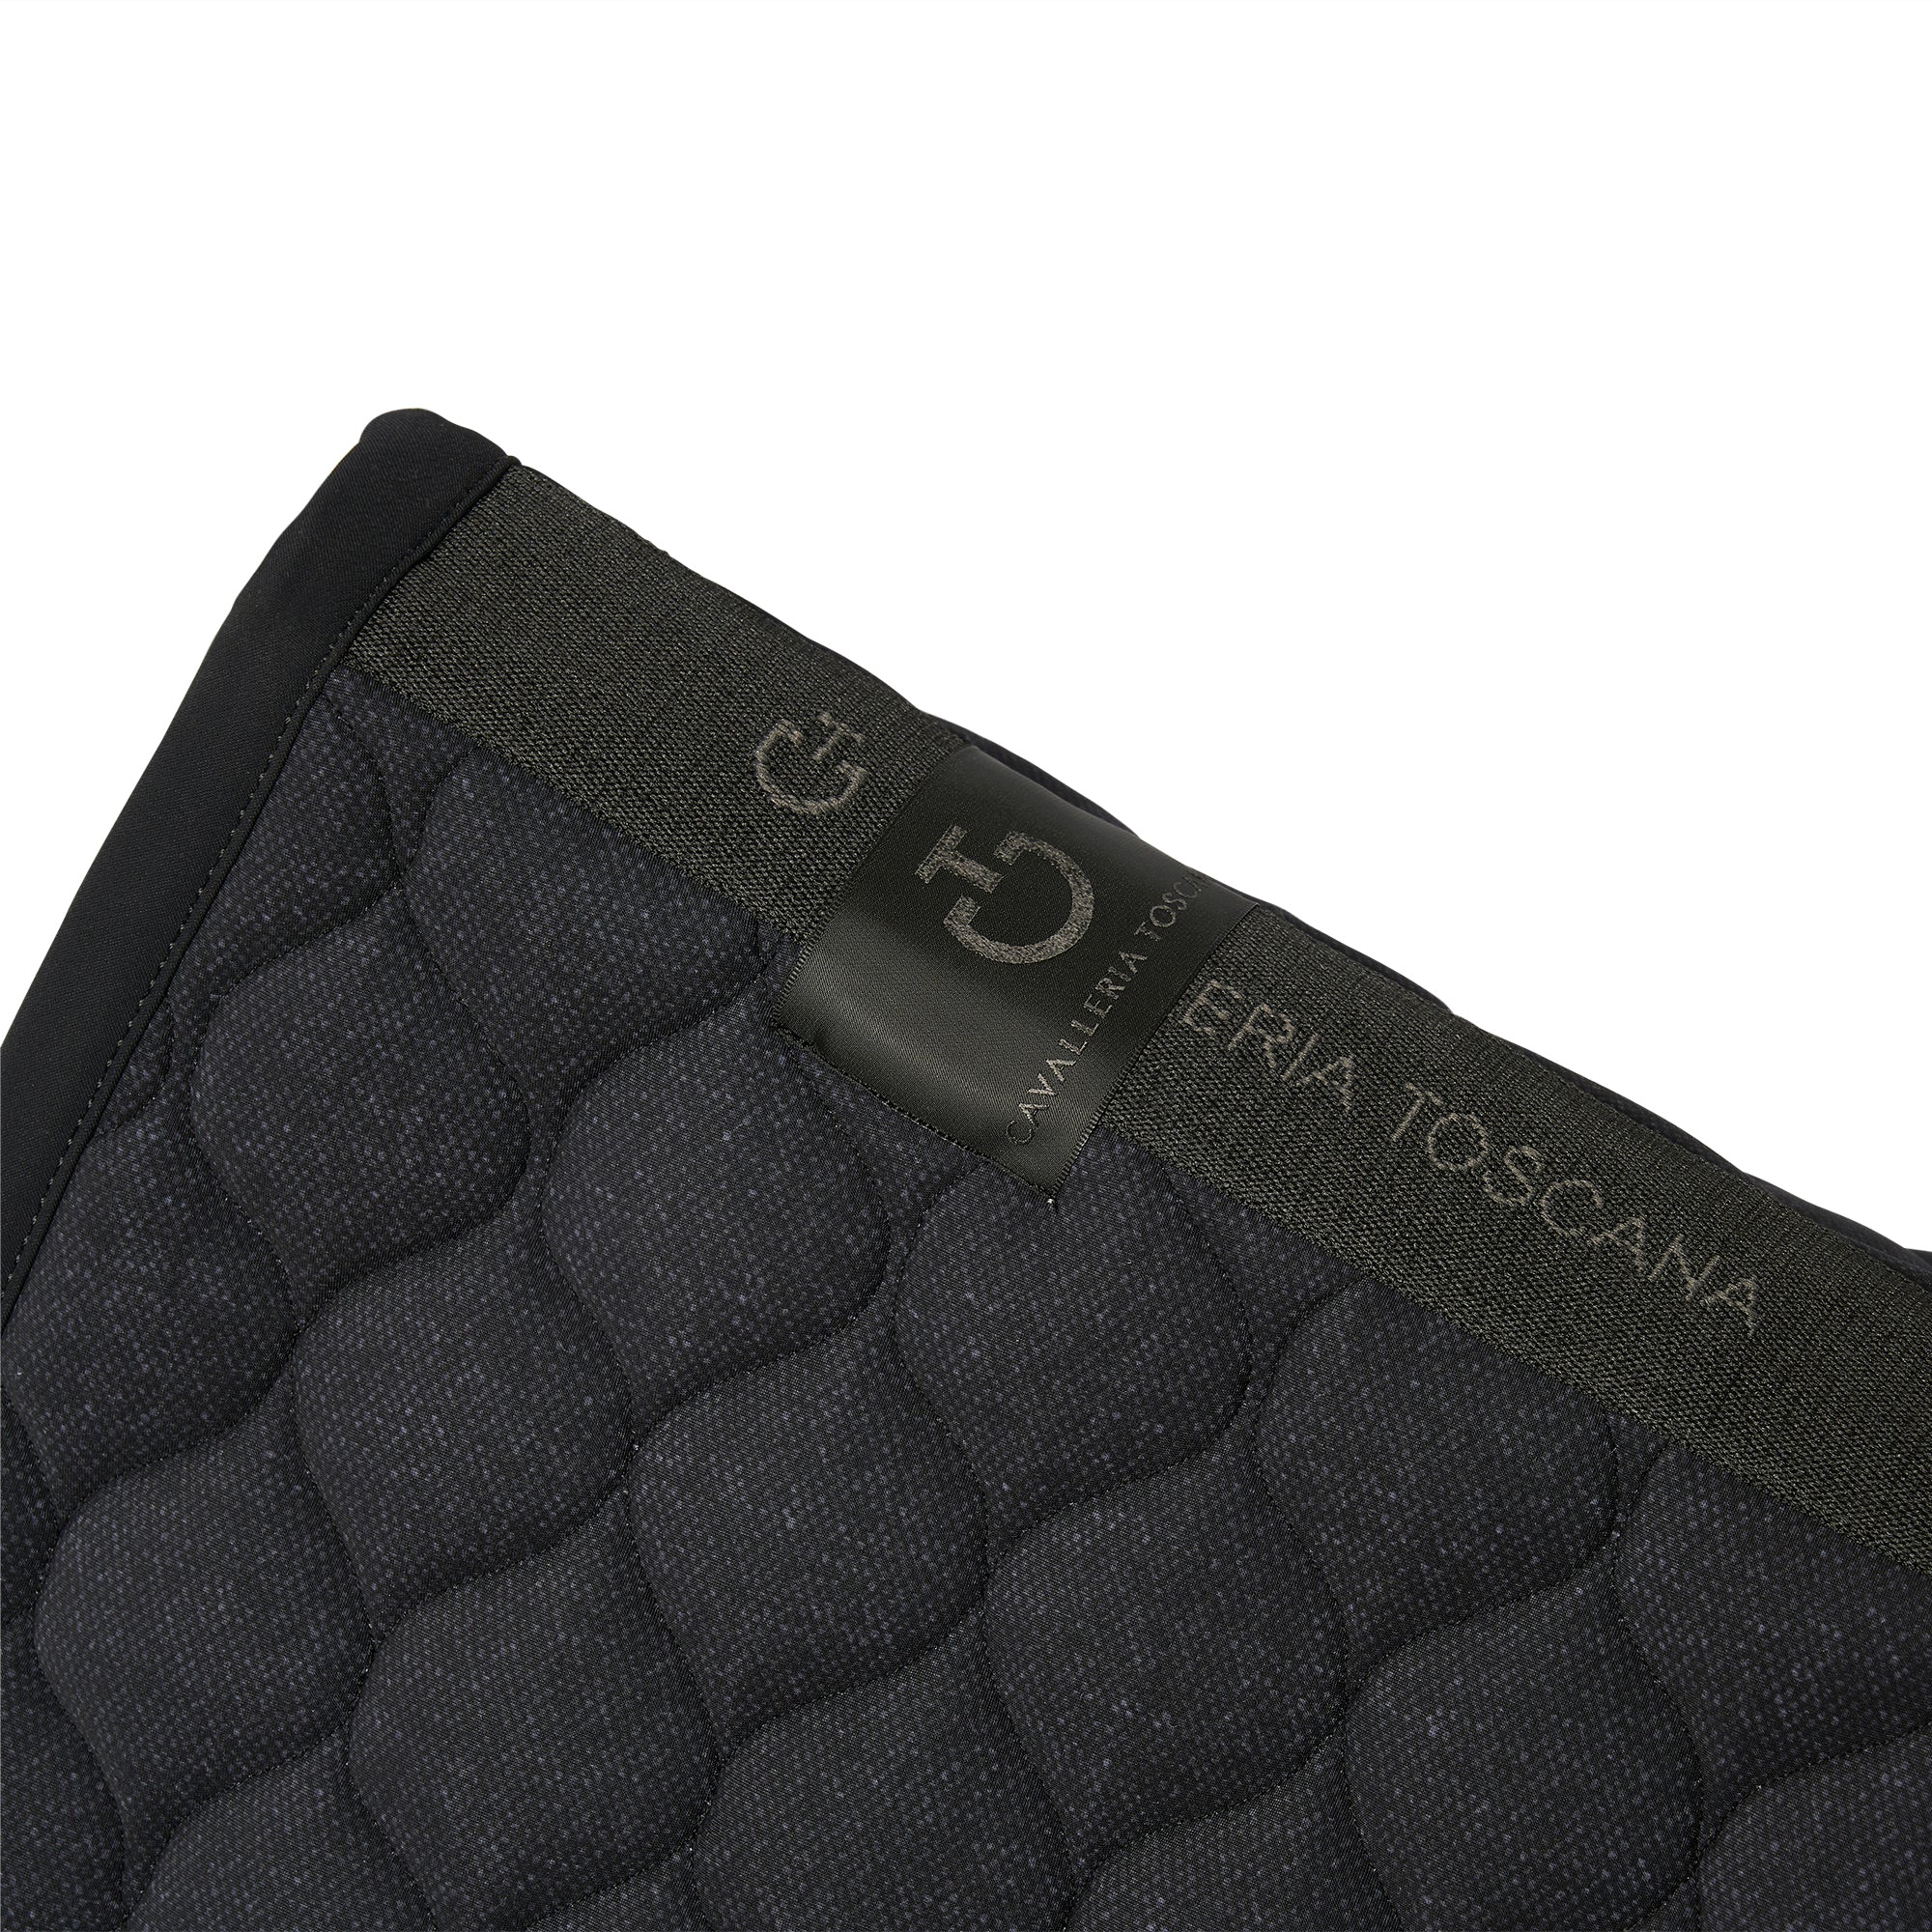 Cavalleria Toscana saddle pad with contrasting logo and boarder